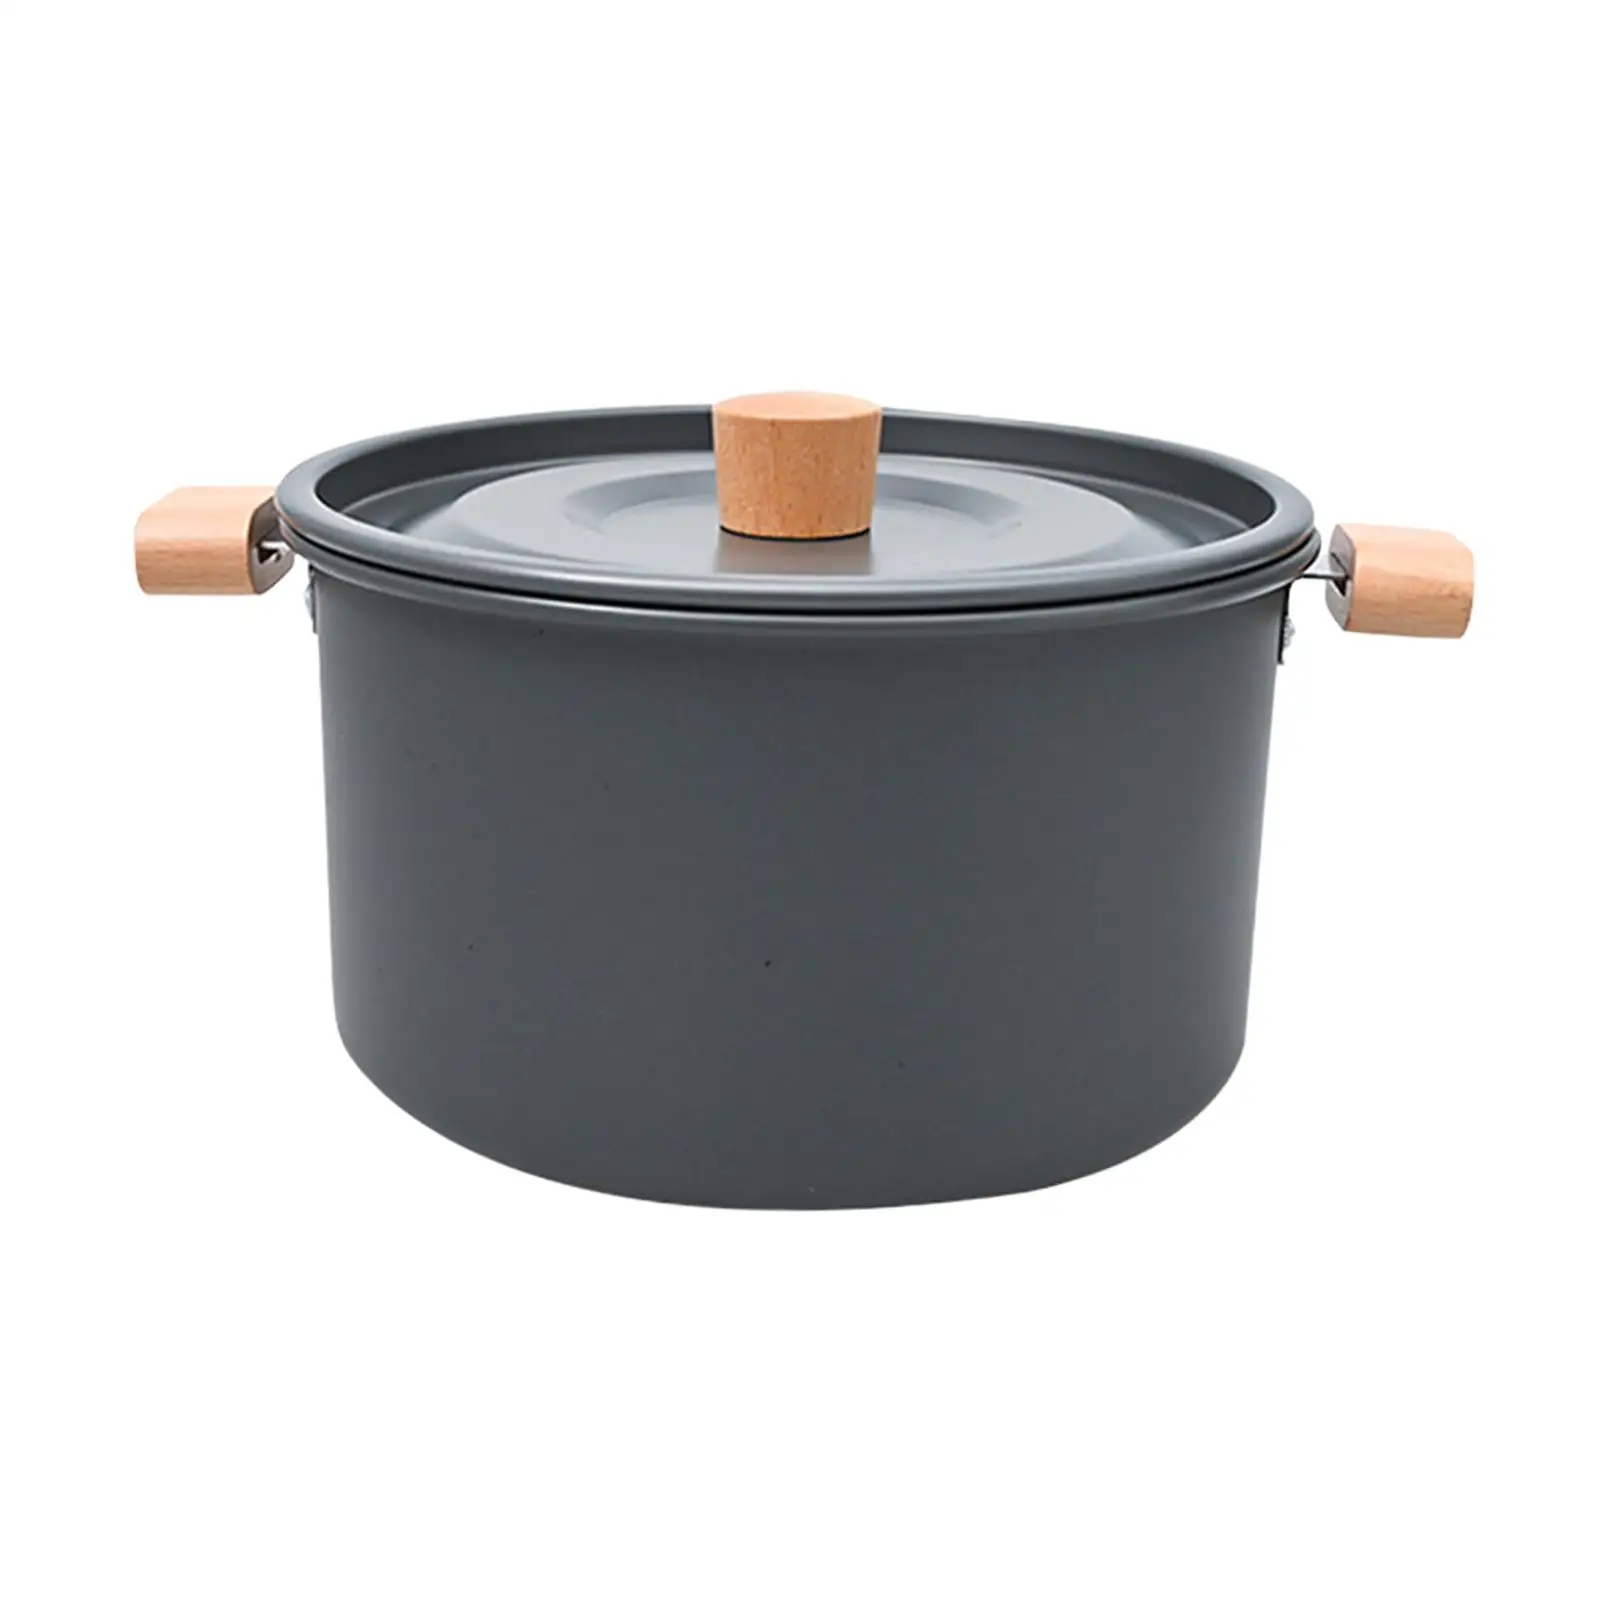 Camping Stockpot Round Large with Lid for Backpacking Home Hiking